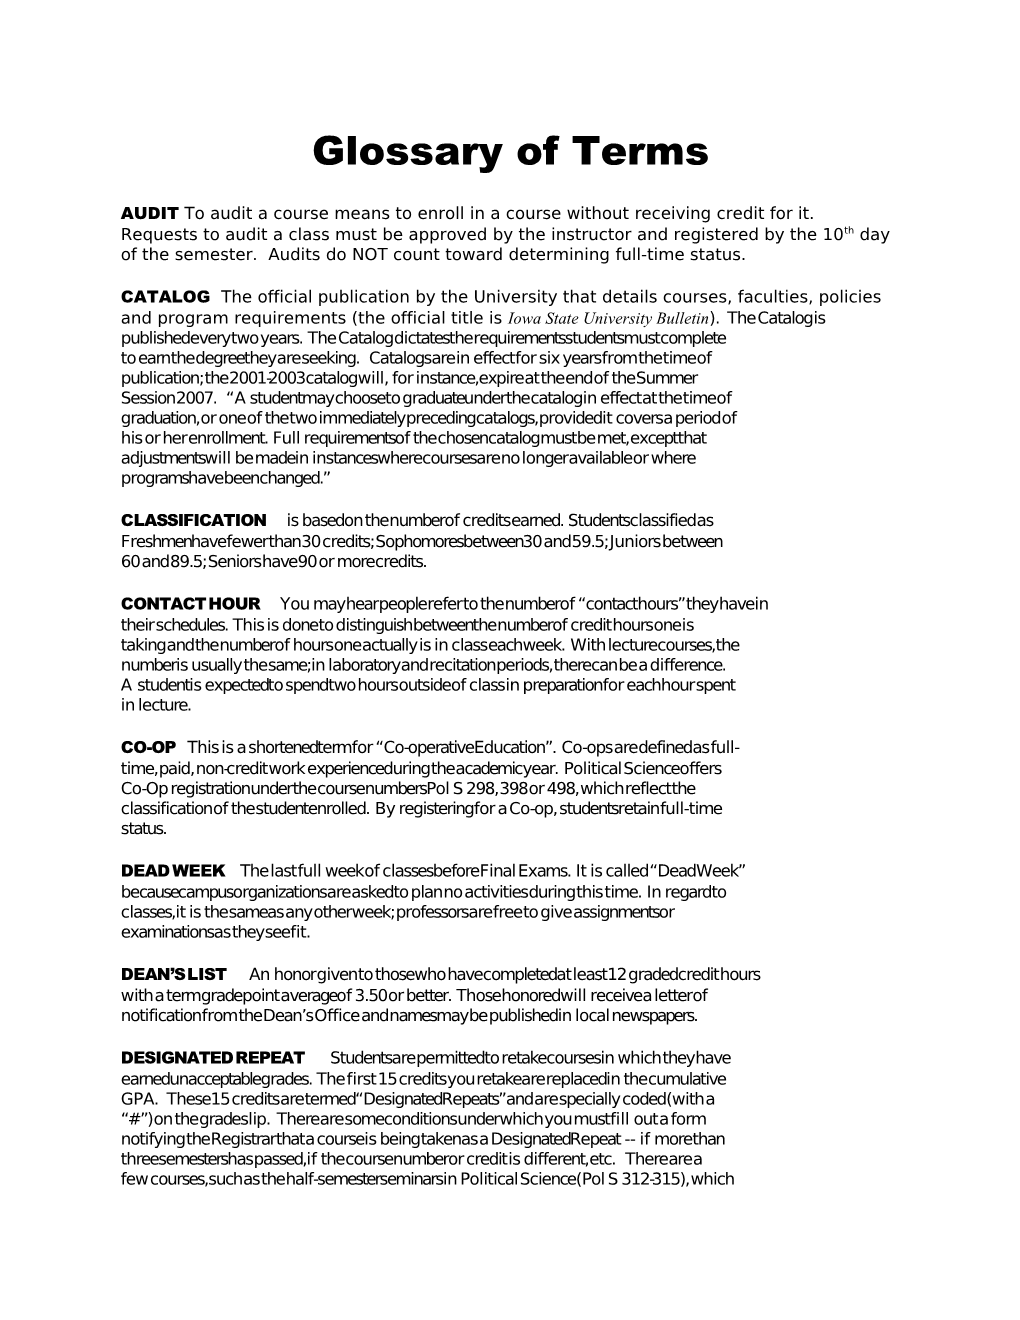 Glossary of Terms s5